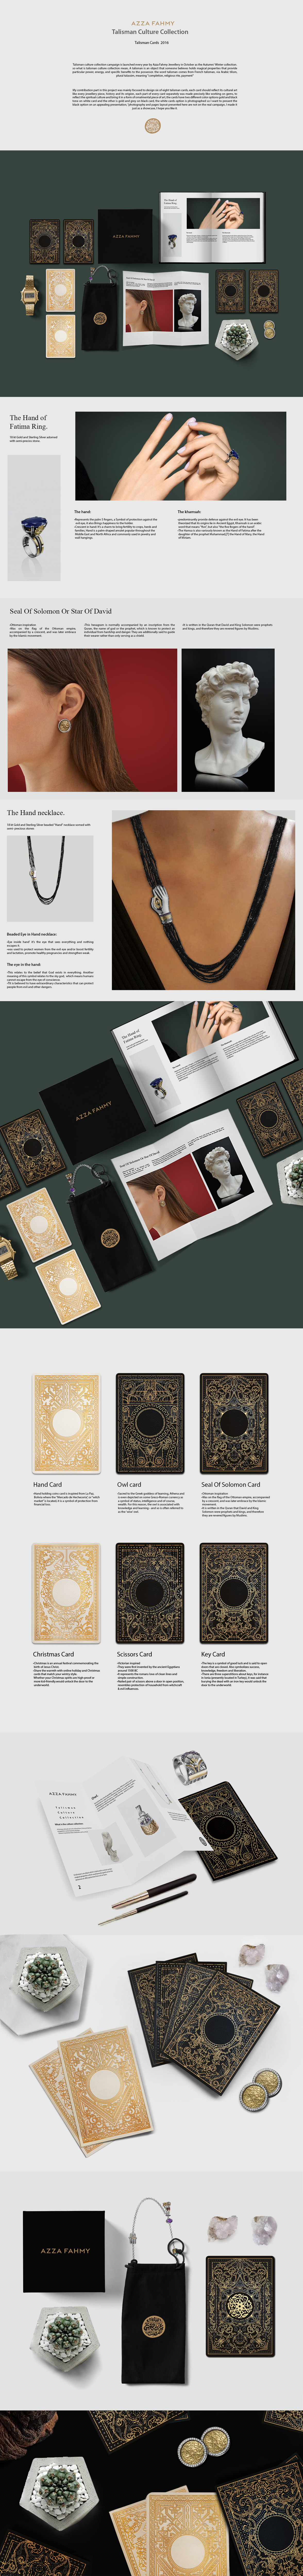 branding  art direction  Jewellery Talisman cards Packaging Corporate Identity visual identity Photography  User Experience Design logos